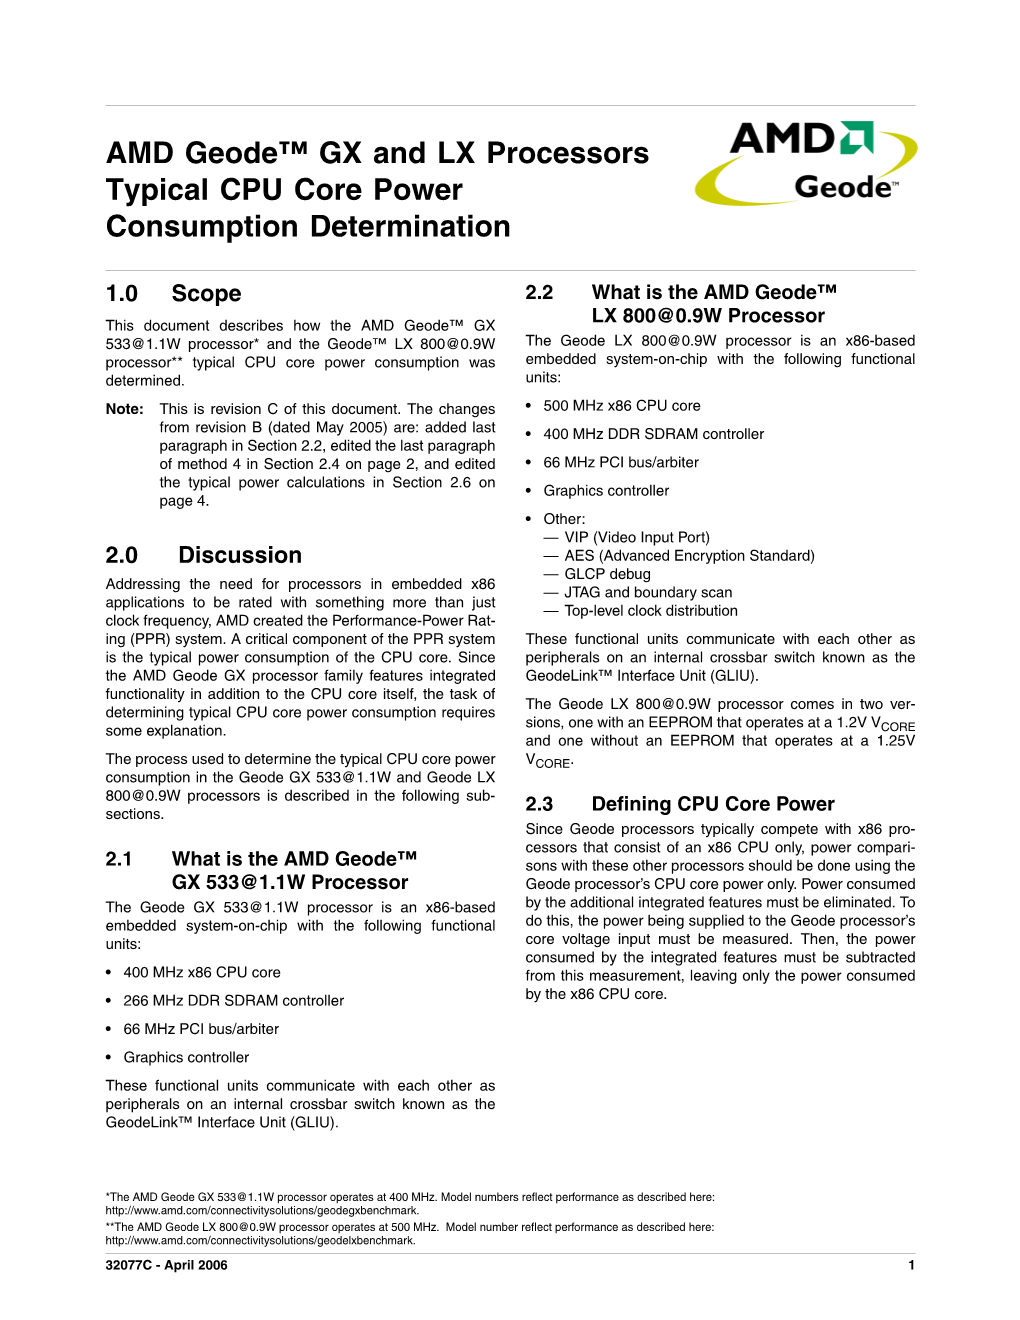 AMD Geode™ GX and LX Processors Typical CPU Core Power Consumption Determination